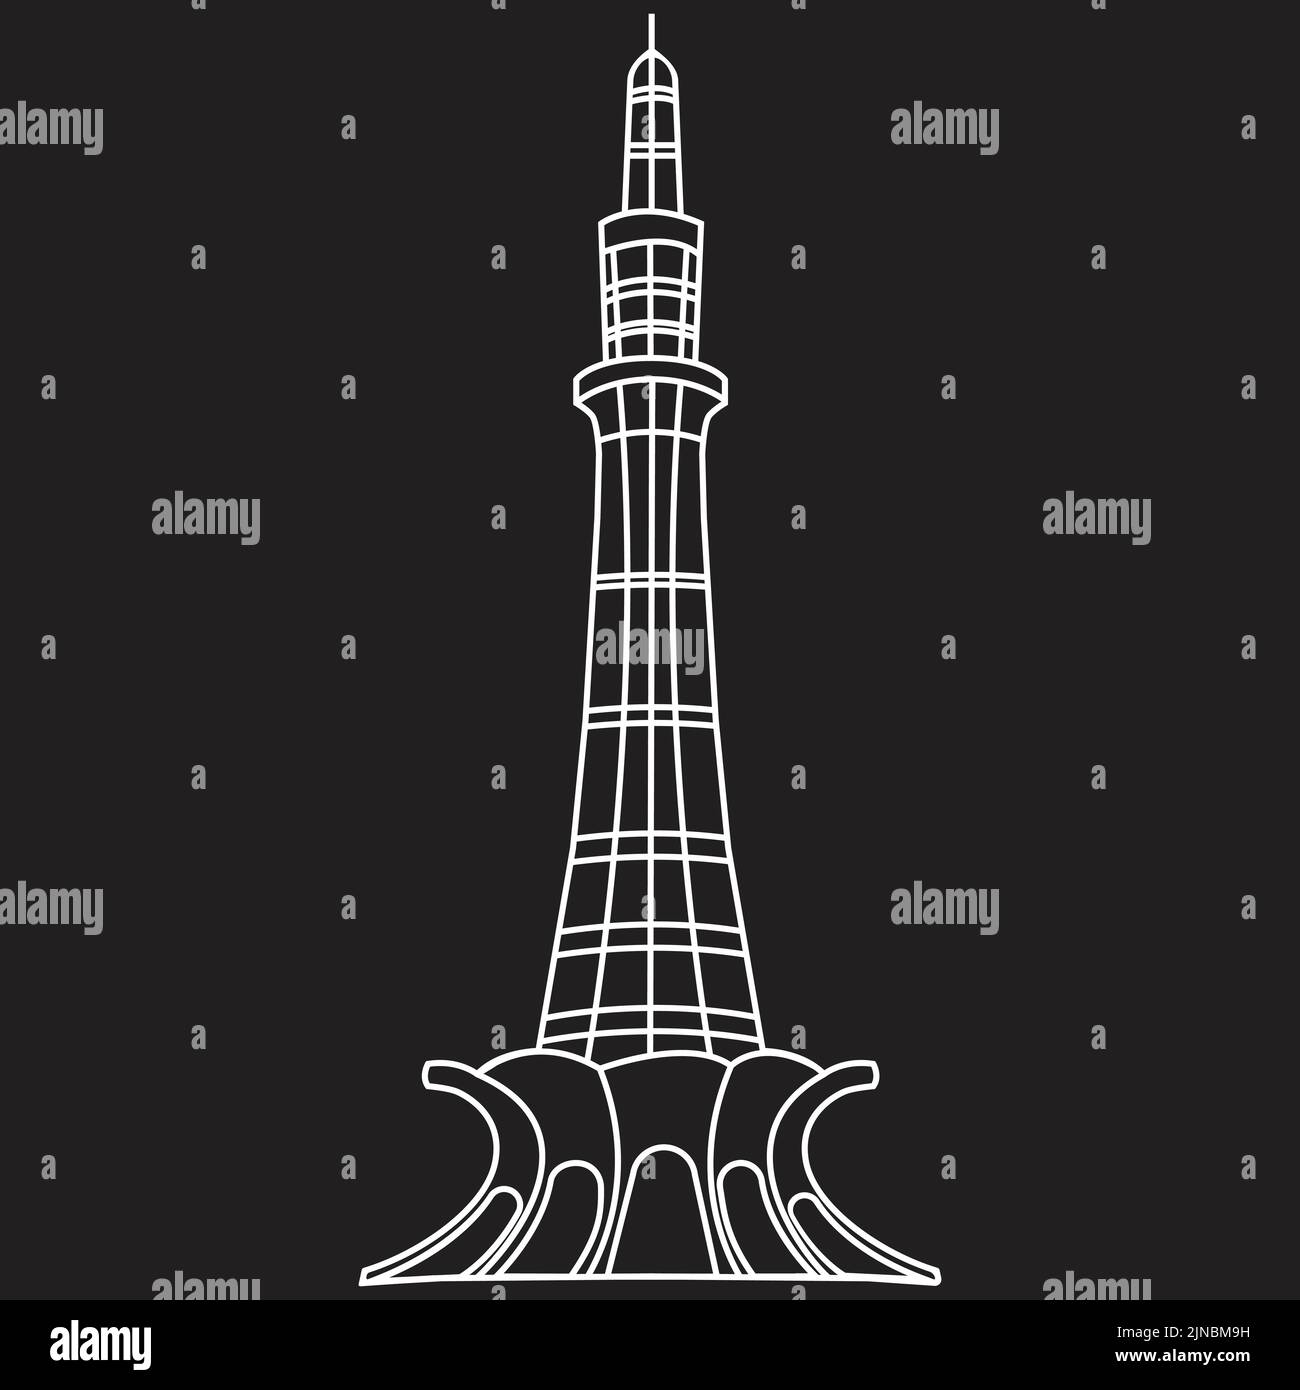 Vector illustration design of the Minar E Pakistan tower located in Lahore, Pakistan isolated on a black square background Stock Vector